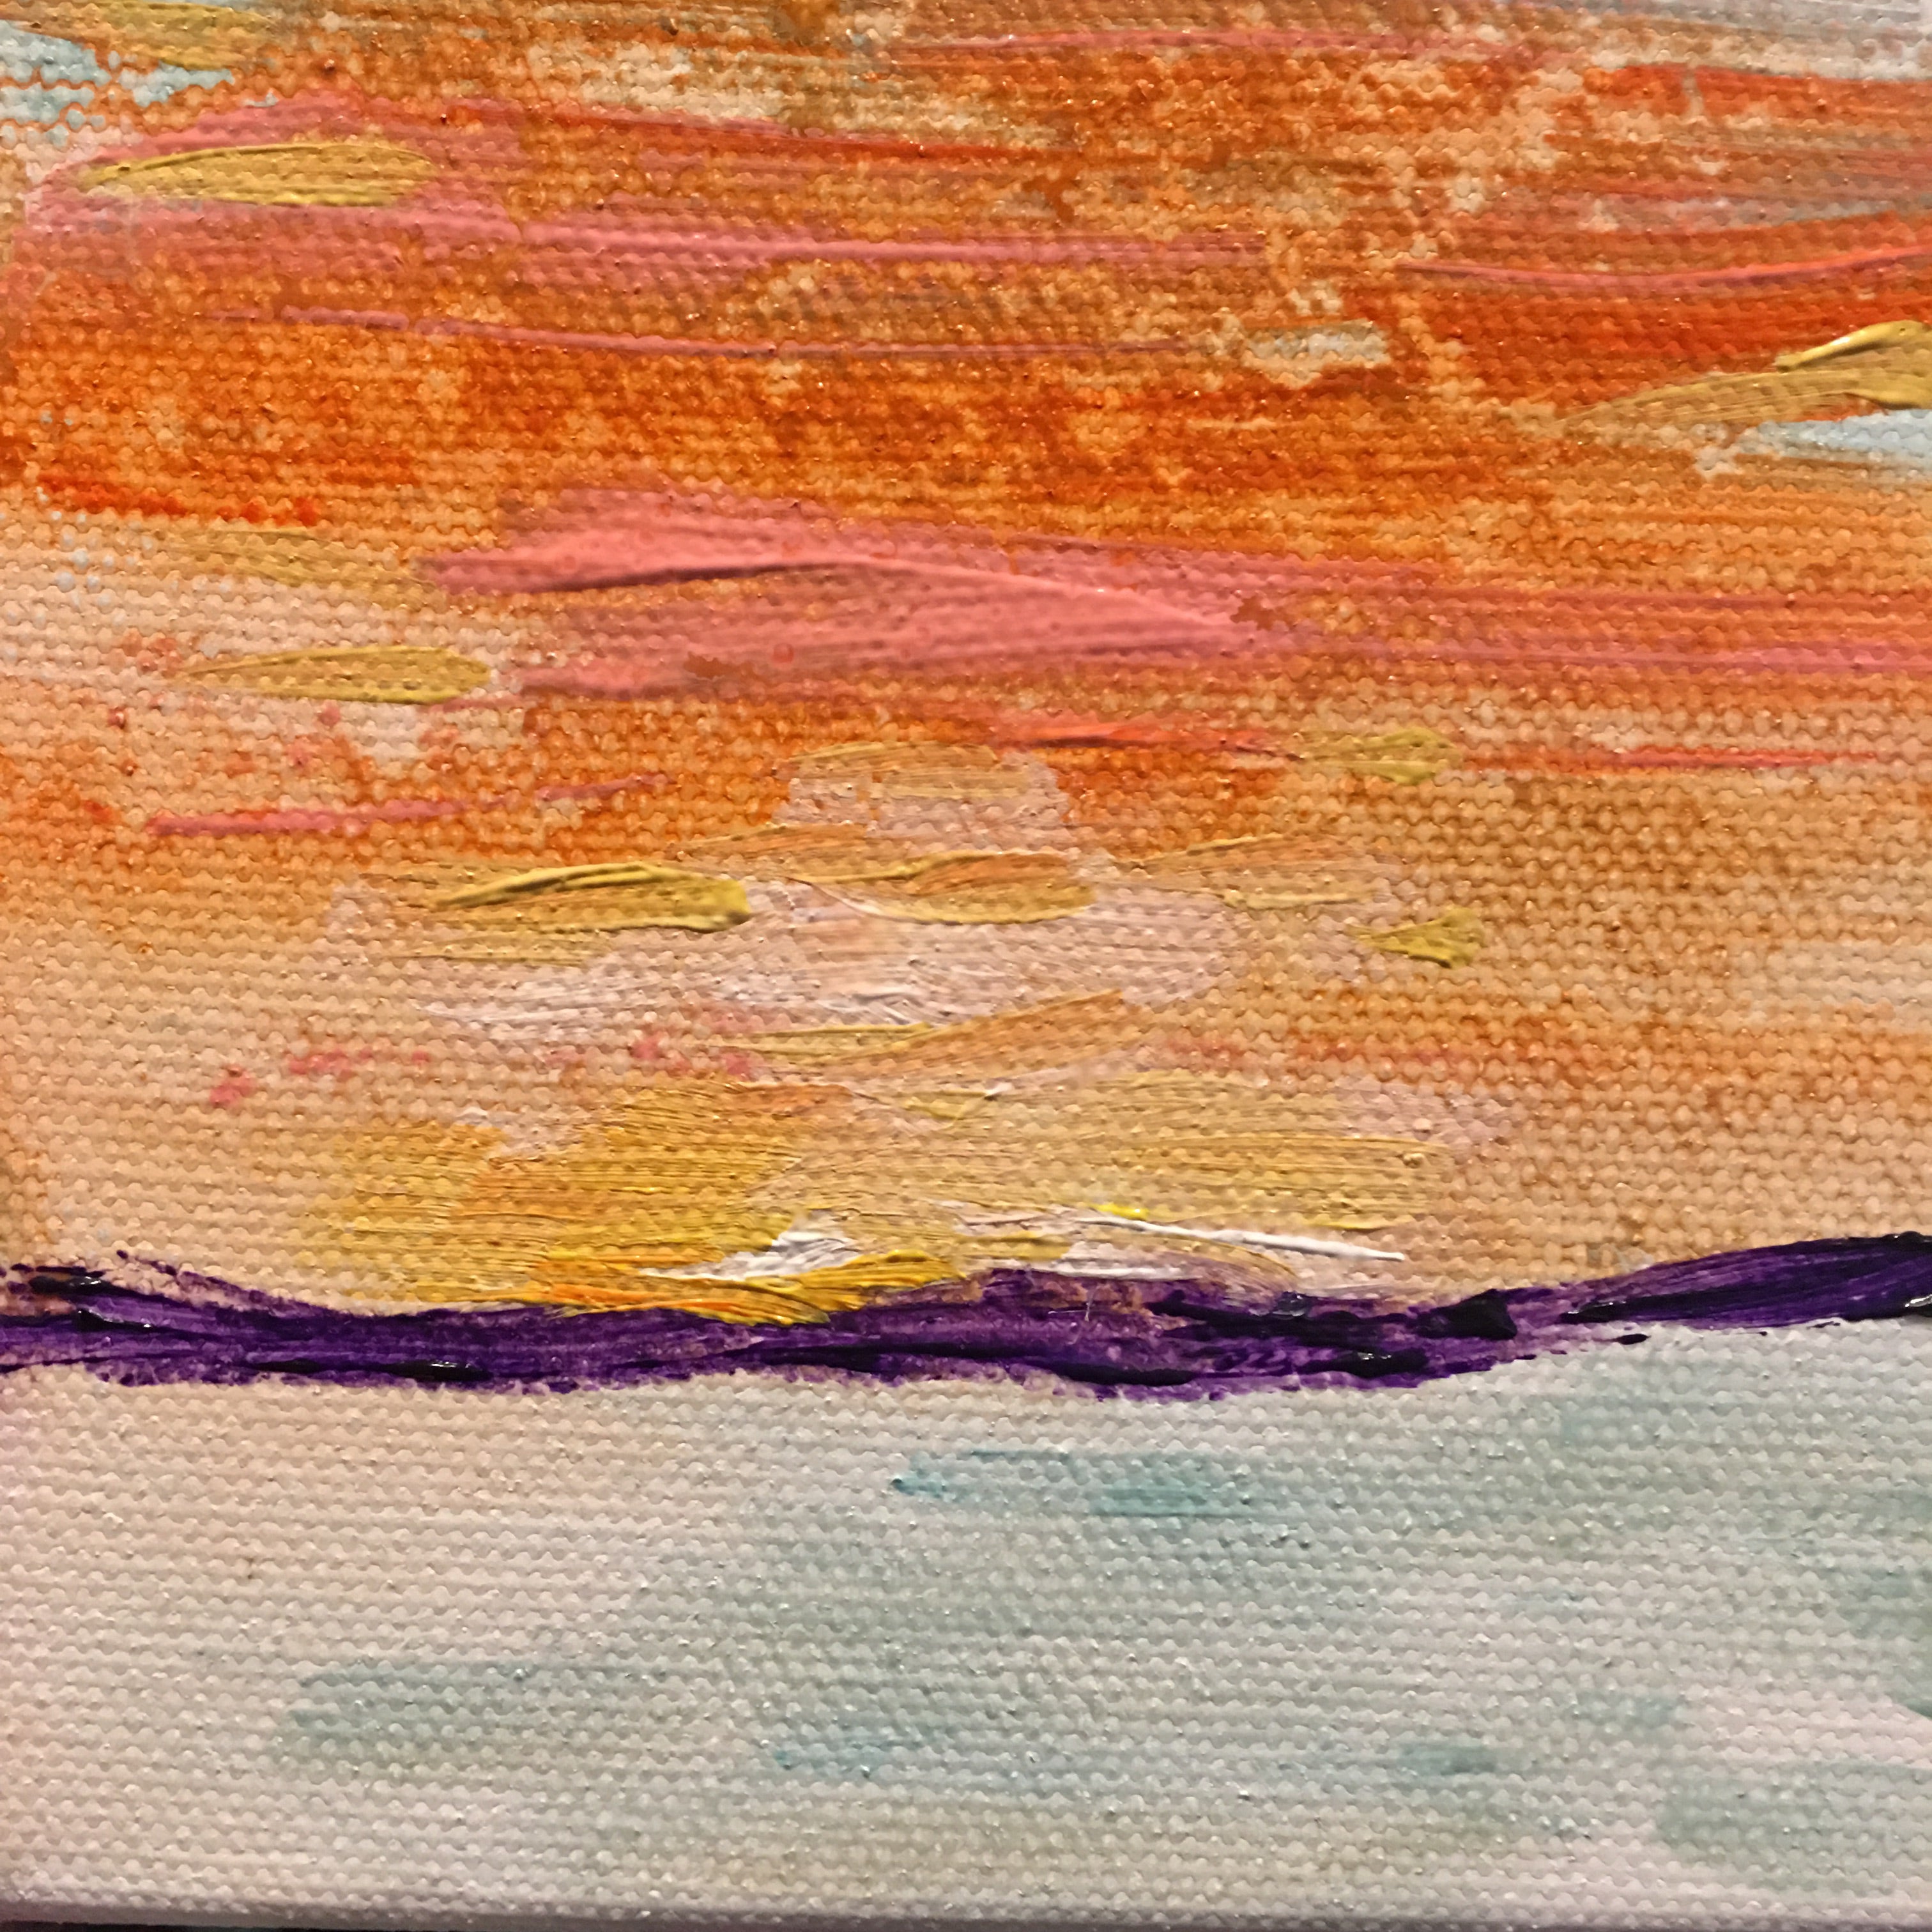 sea mountain and sky on abstract sunset